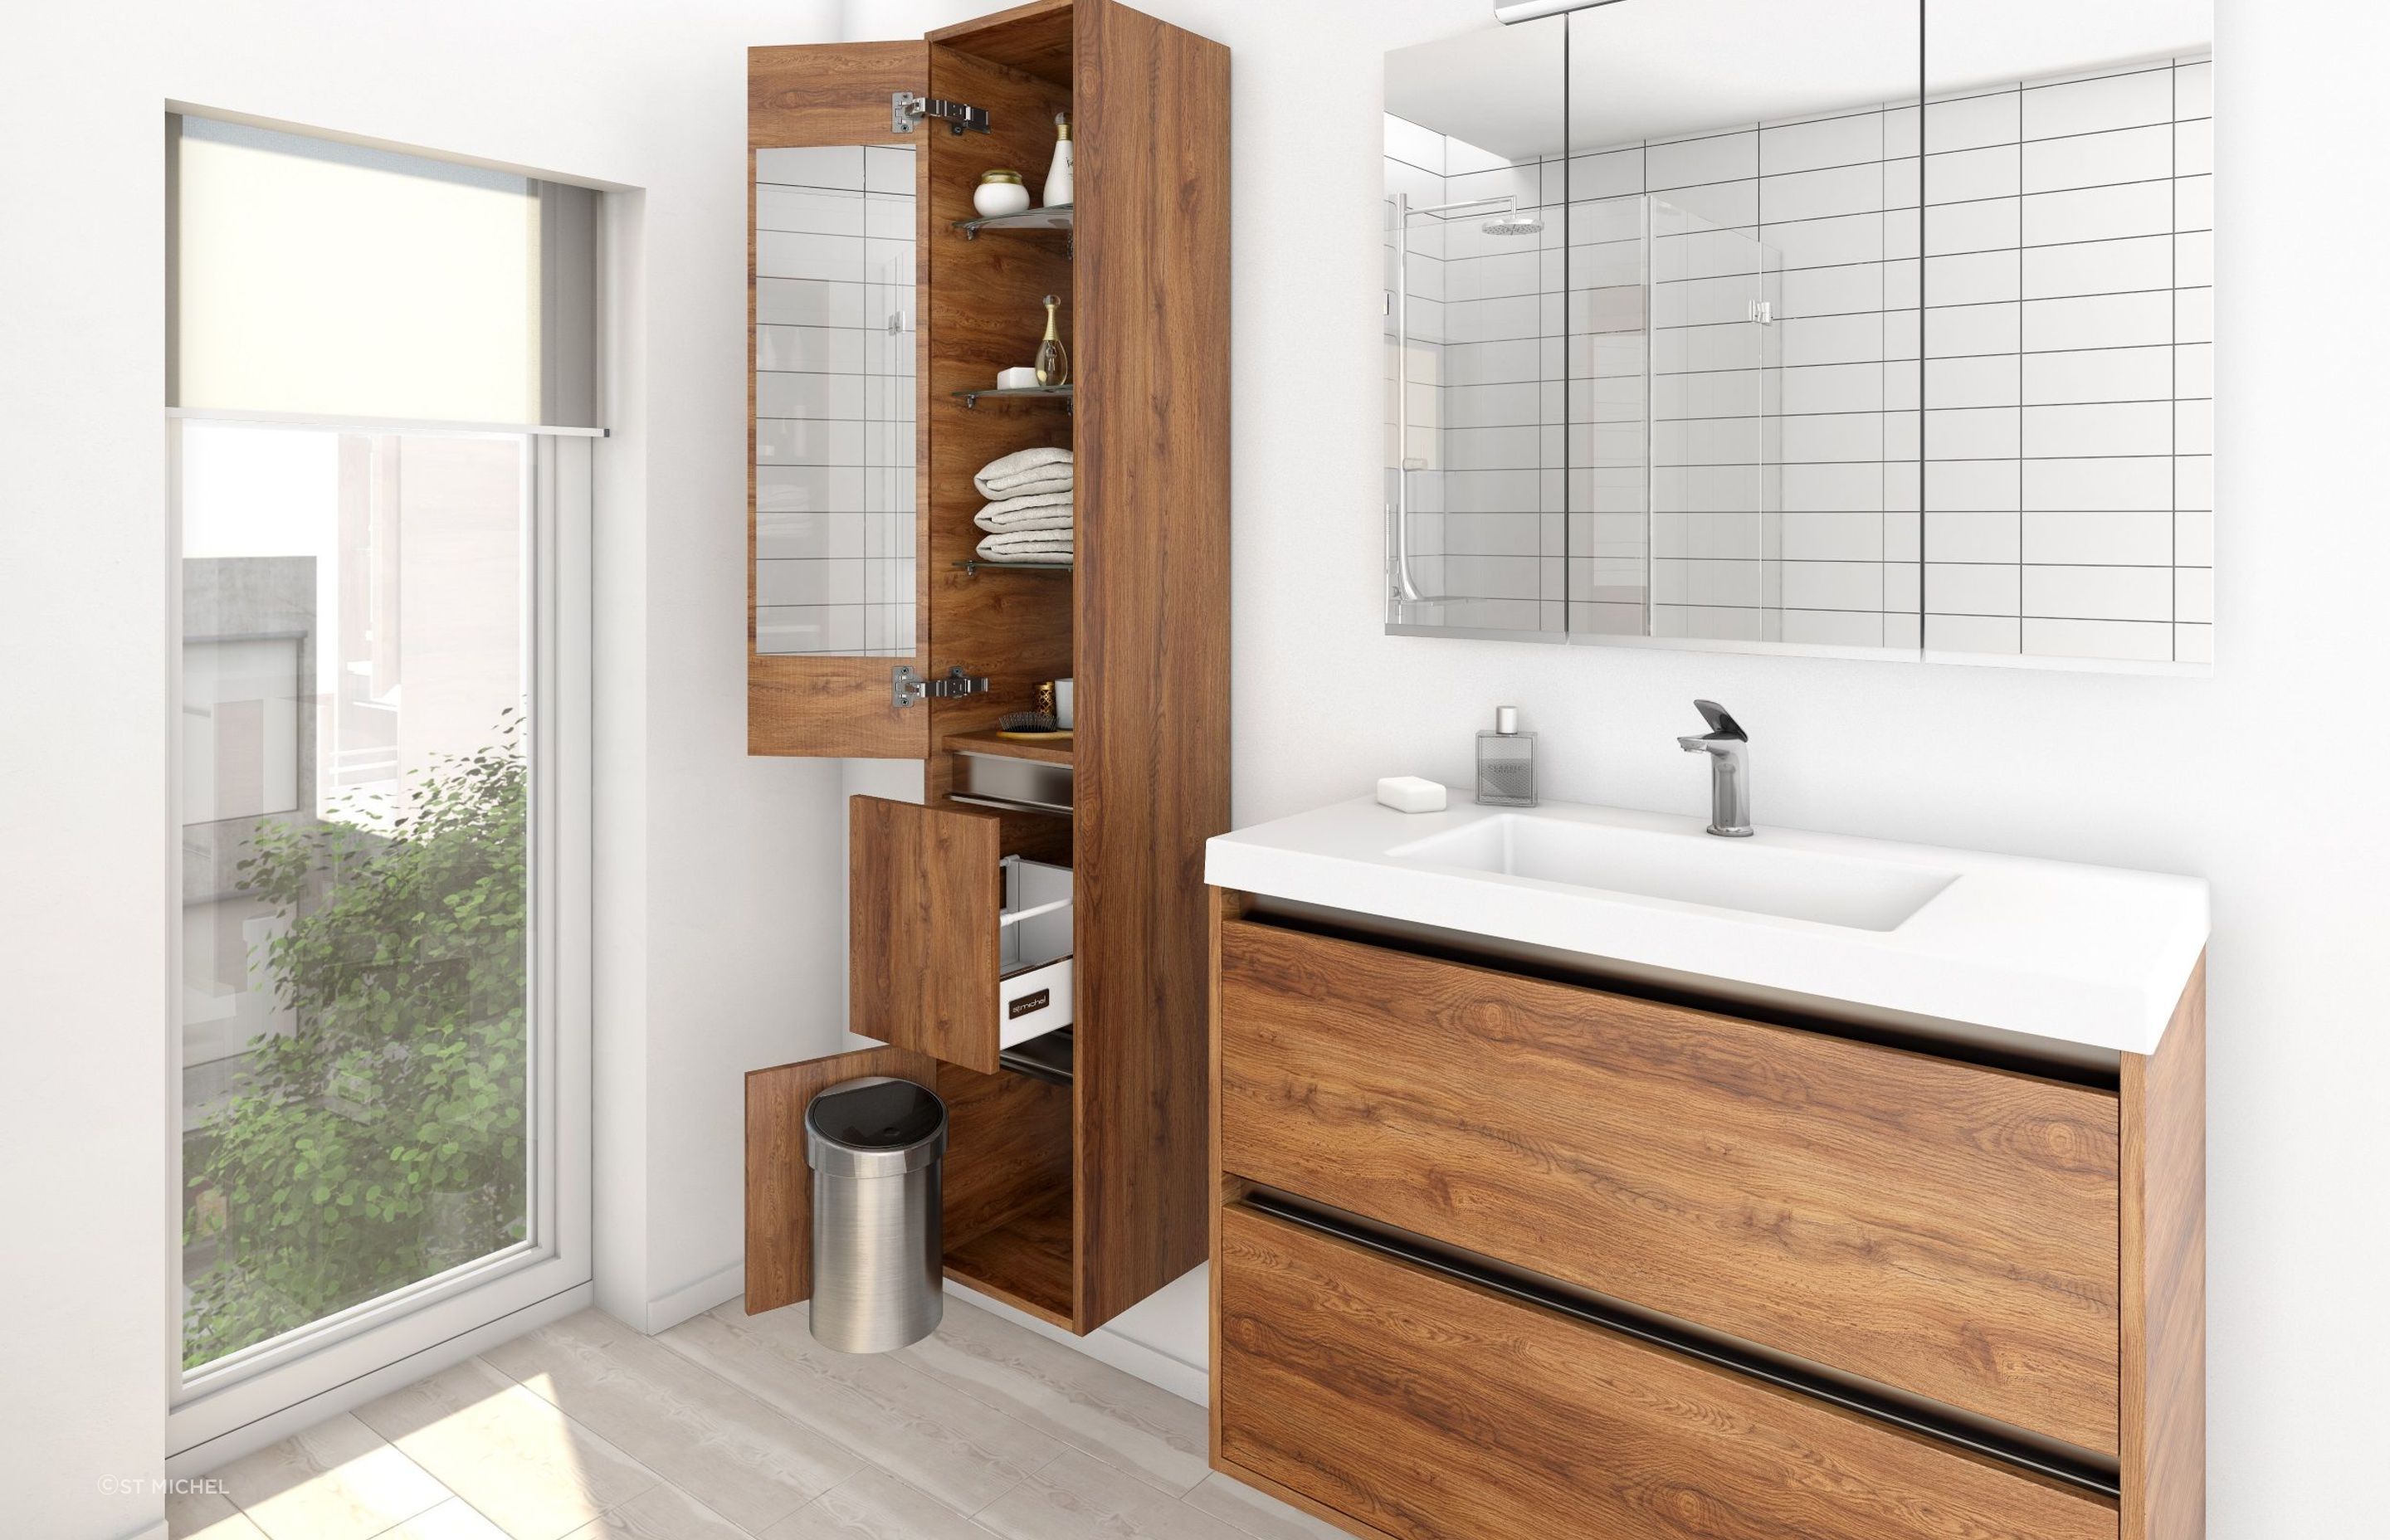 Tall and slim bathroom storage, like the City Tower solution, is much better suited to small bathrooms than traditional options.